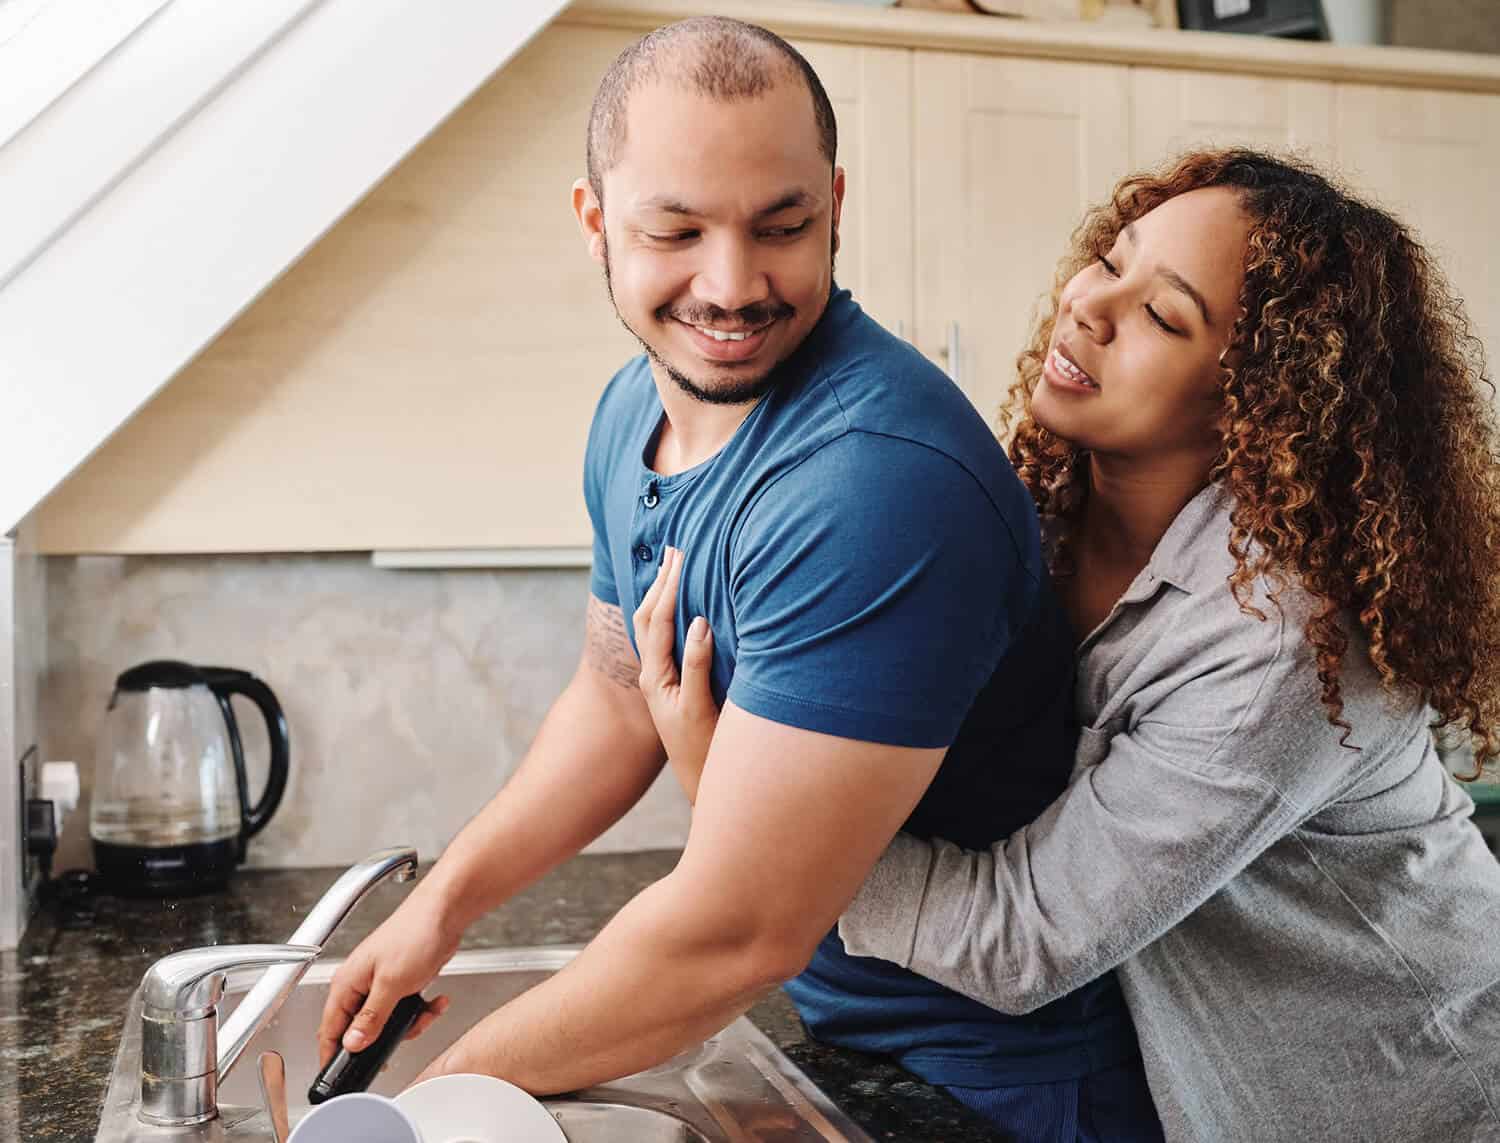 Couple doing dishes together showing agape love in marriage